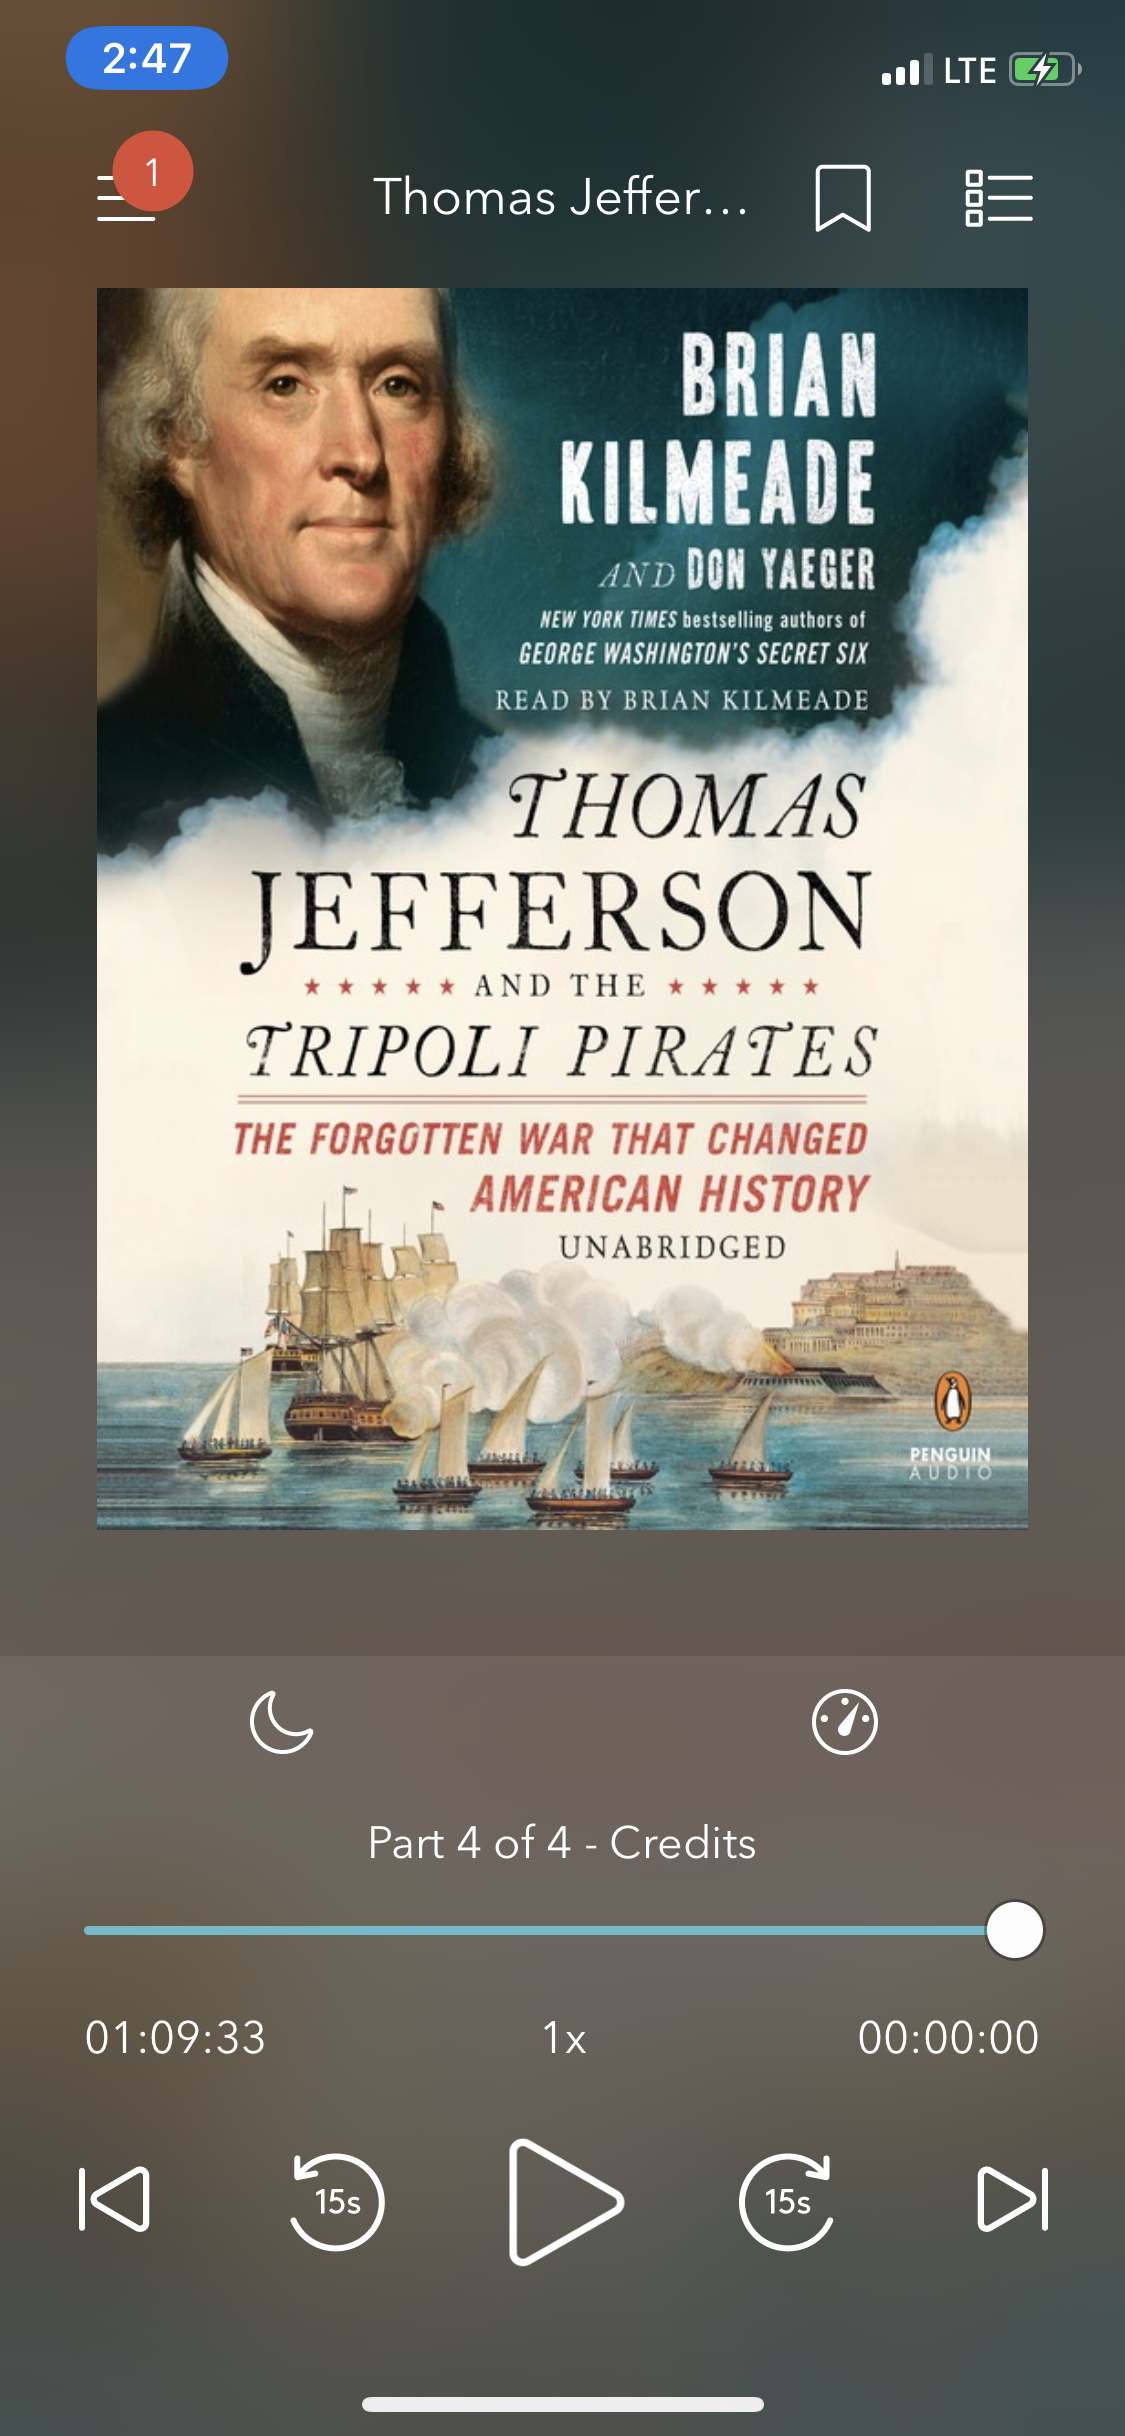 Thomas Jefferson and the Tripoli Pirates: The Forgotten War that Changed American History by Brian Kilmeade, Don Yaeger